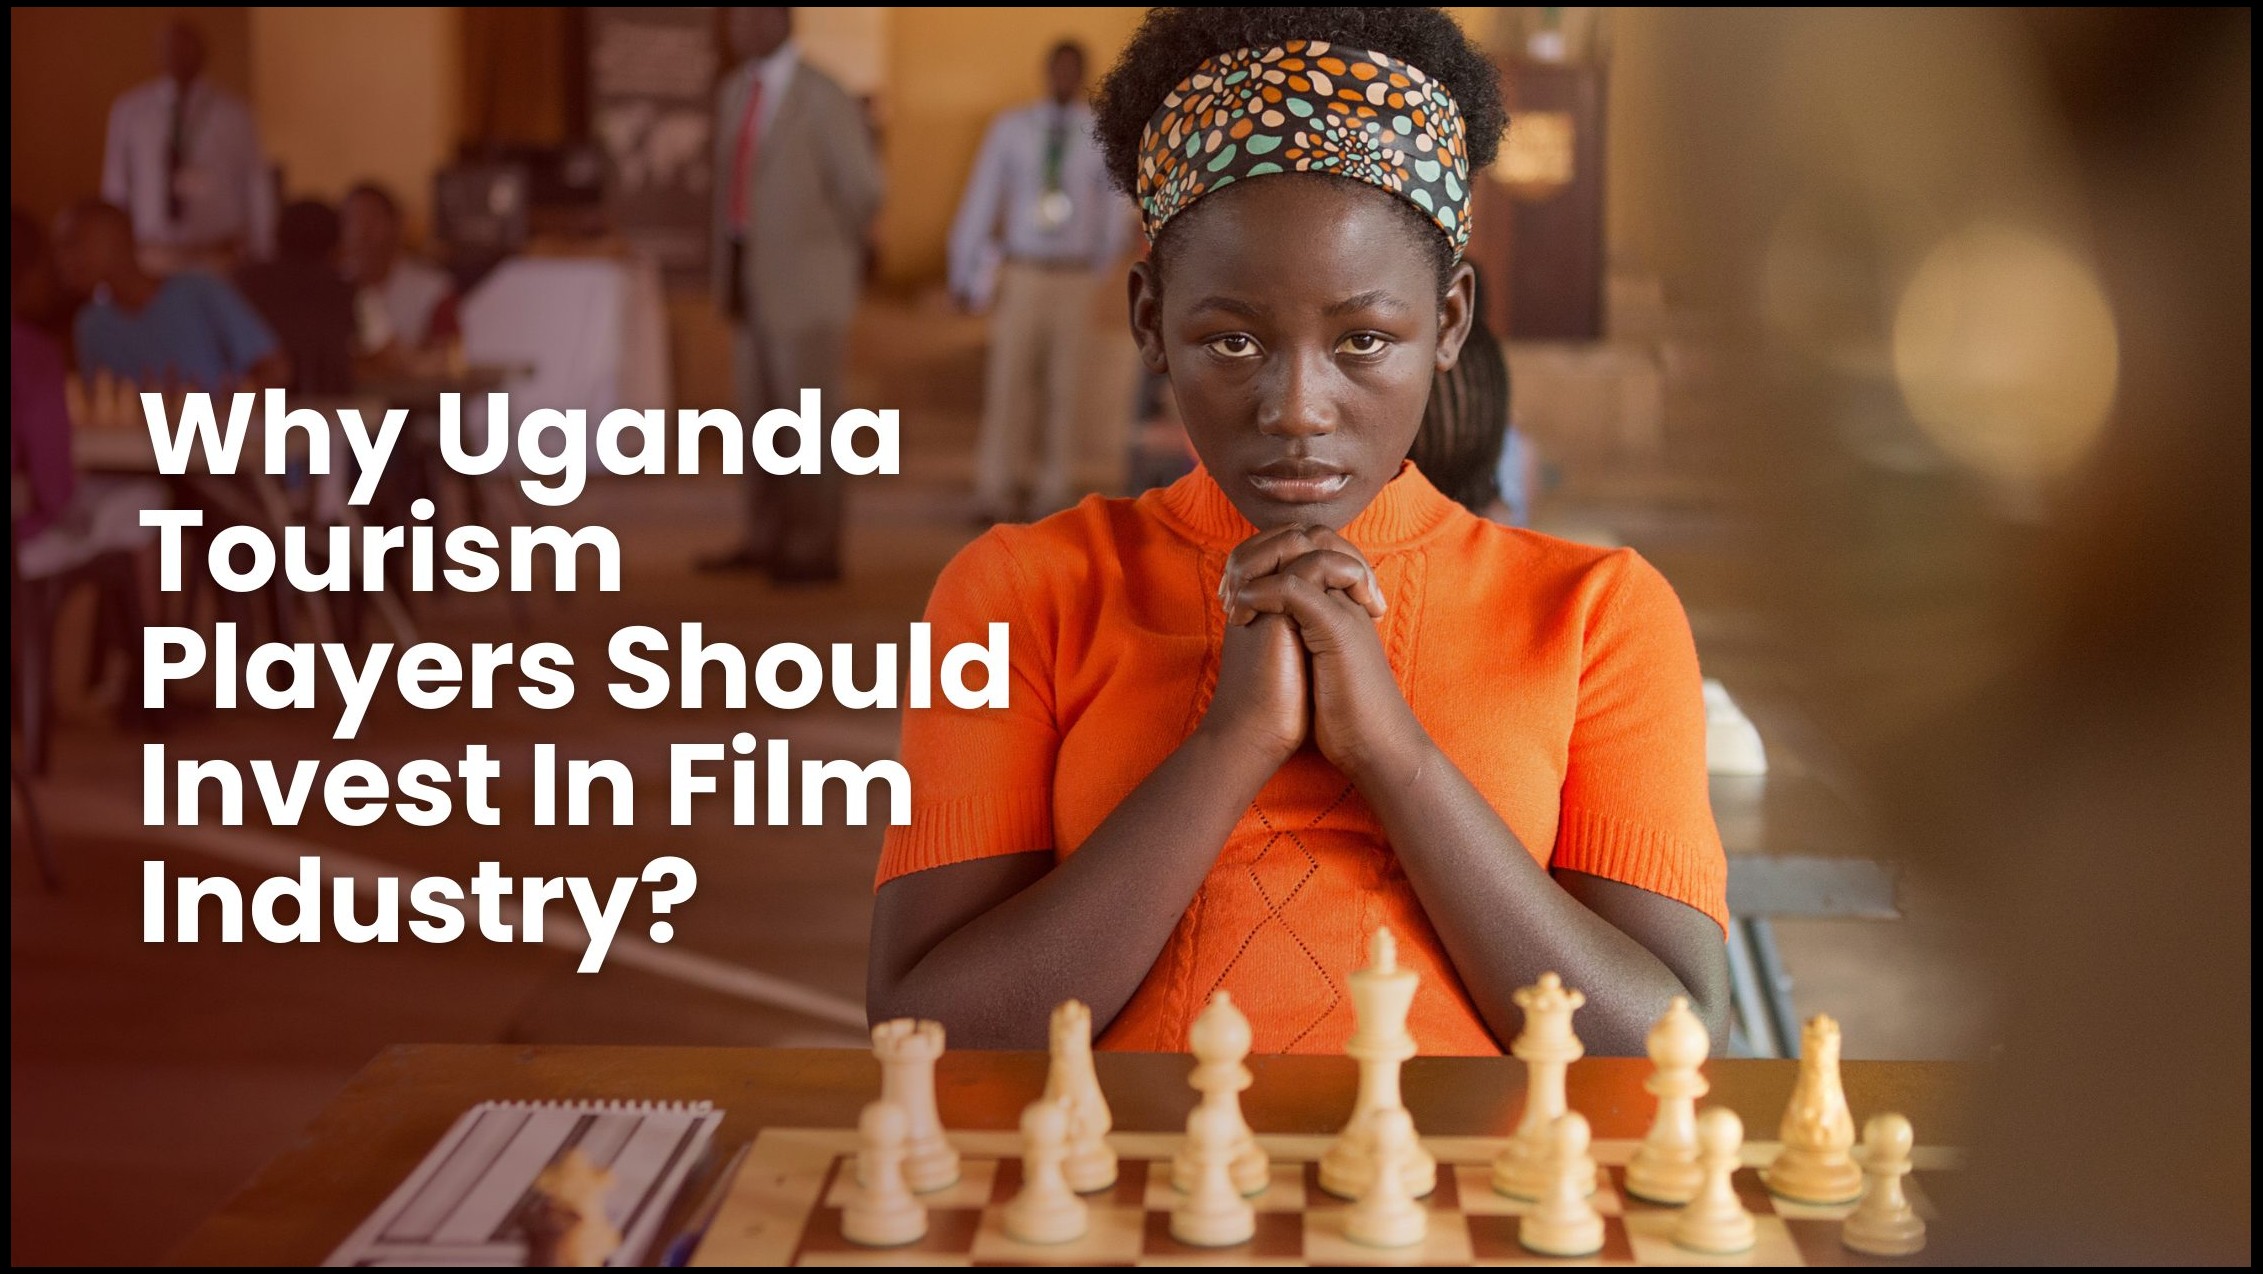 Why Uganda Tourism Players Should Invest In Film Industry?